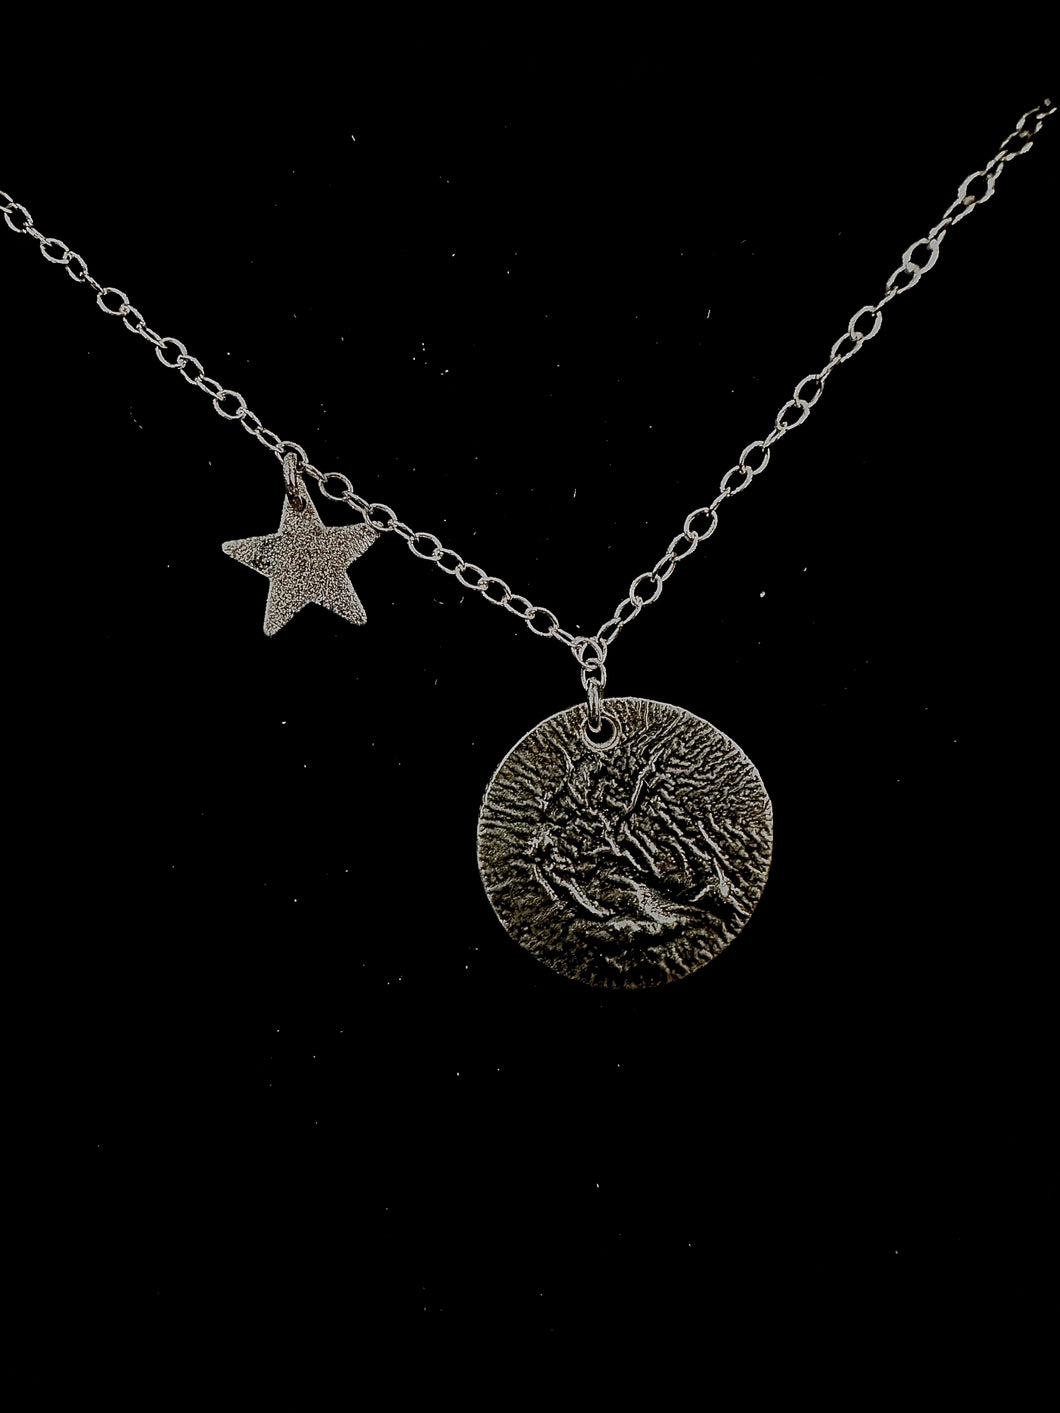 Reticulated moon and frosted sparkling star presented on a silver chain.